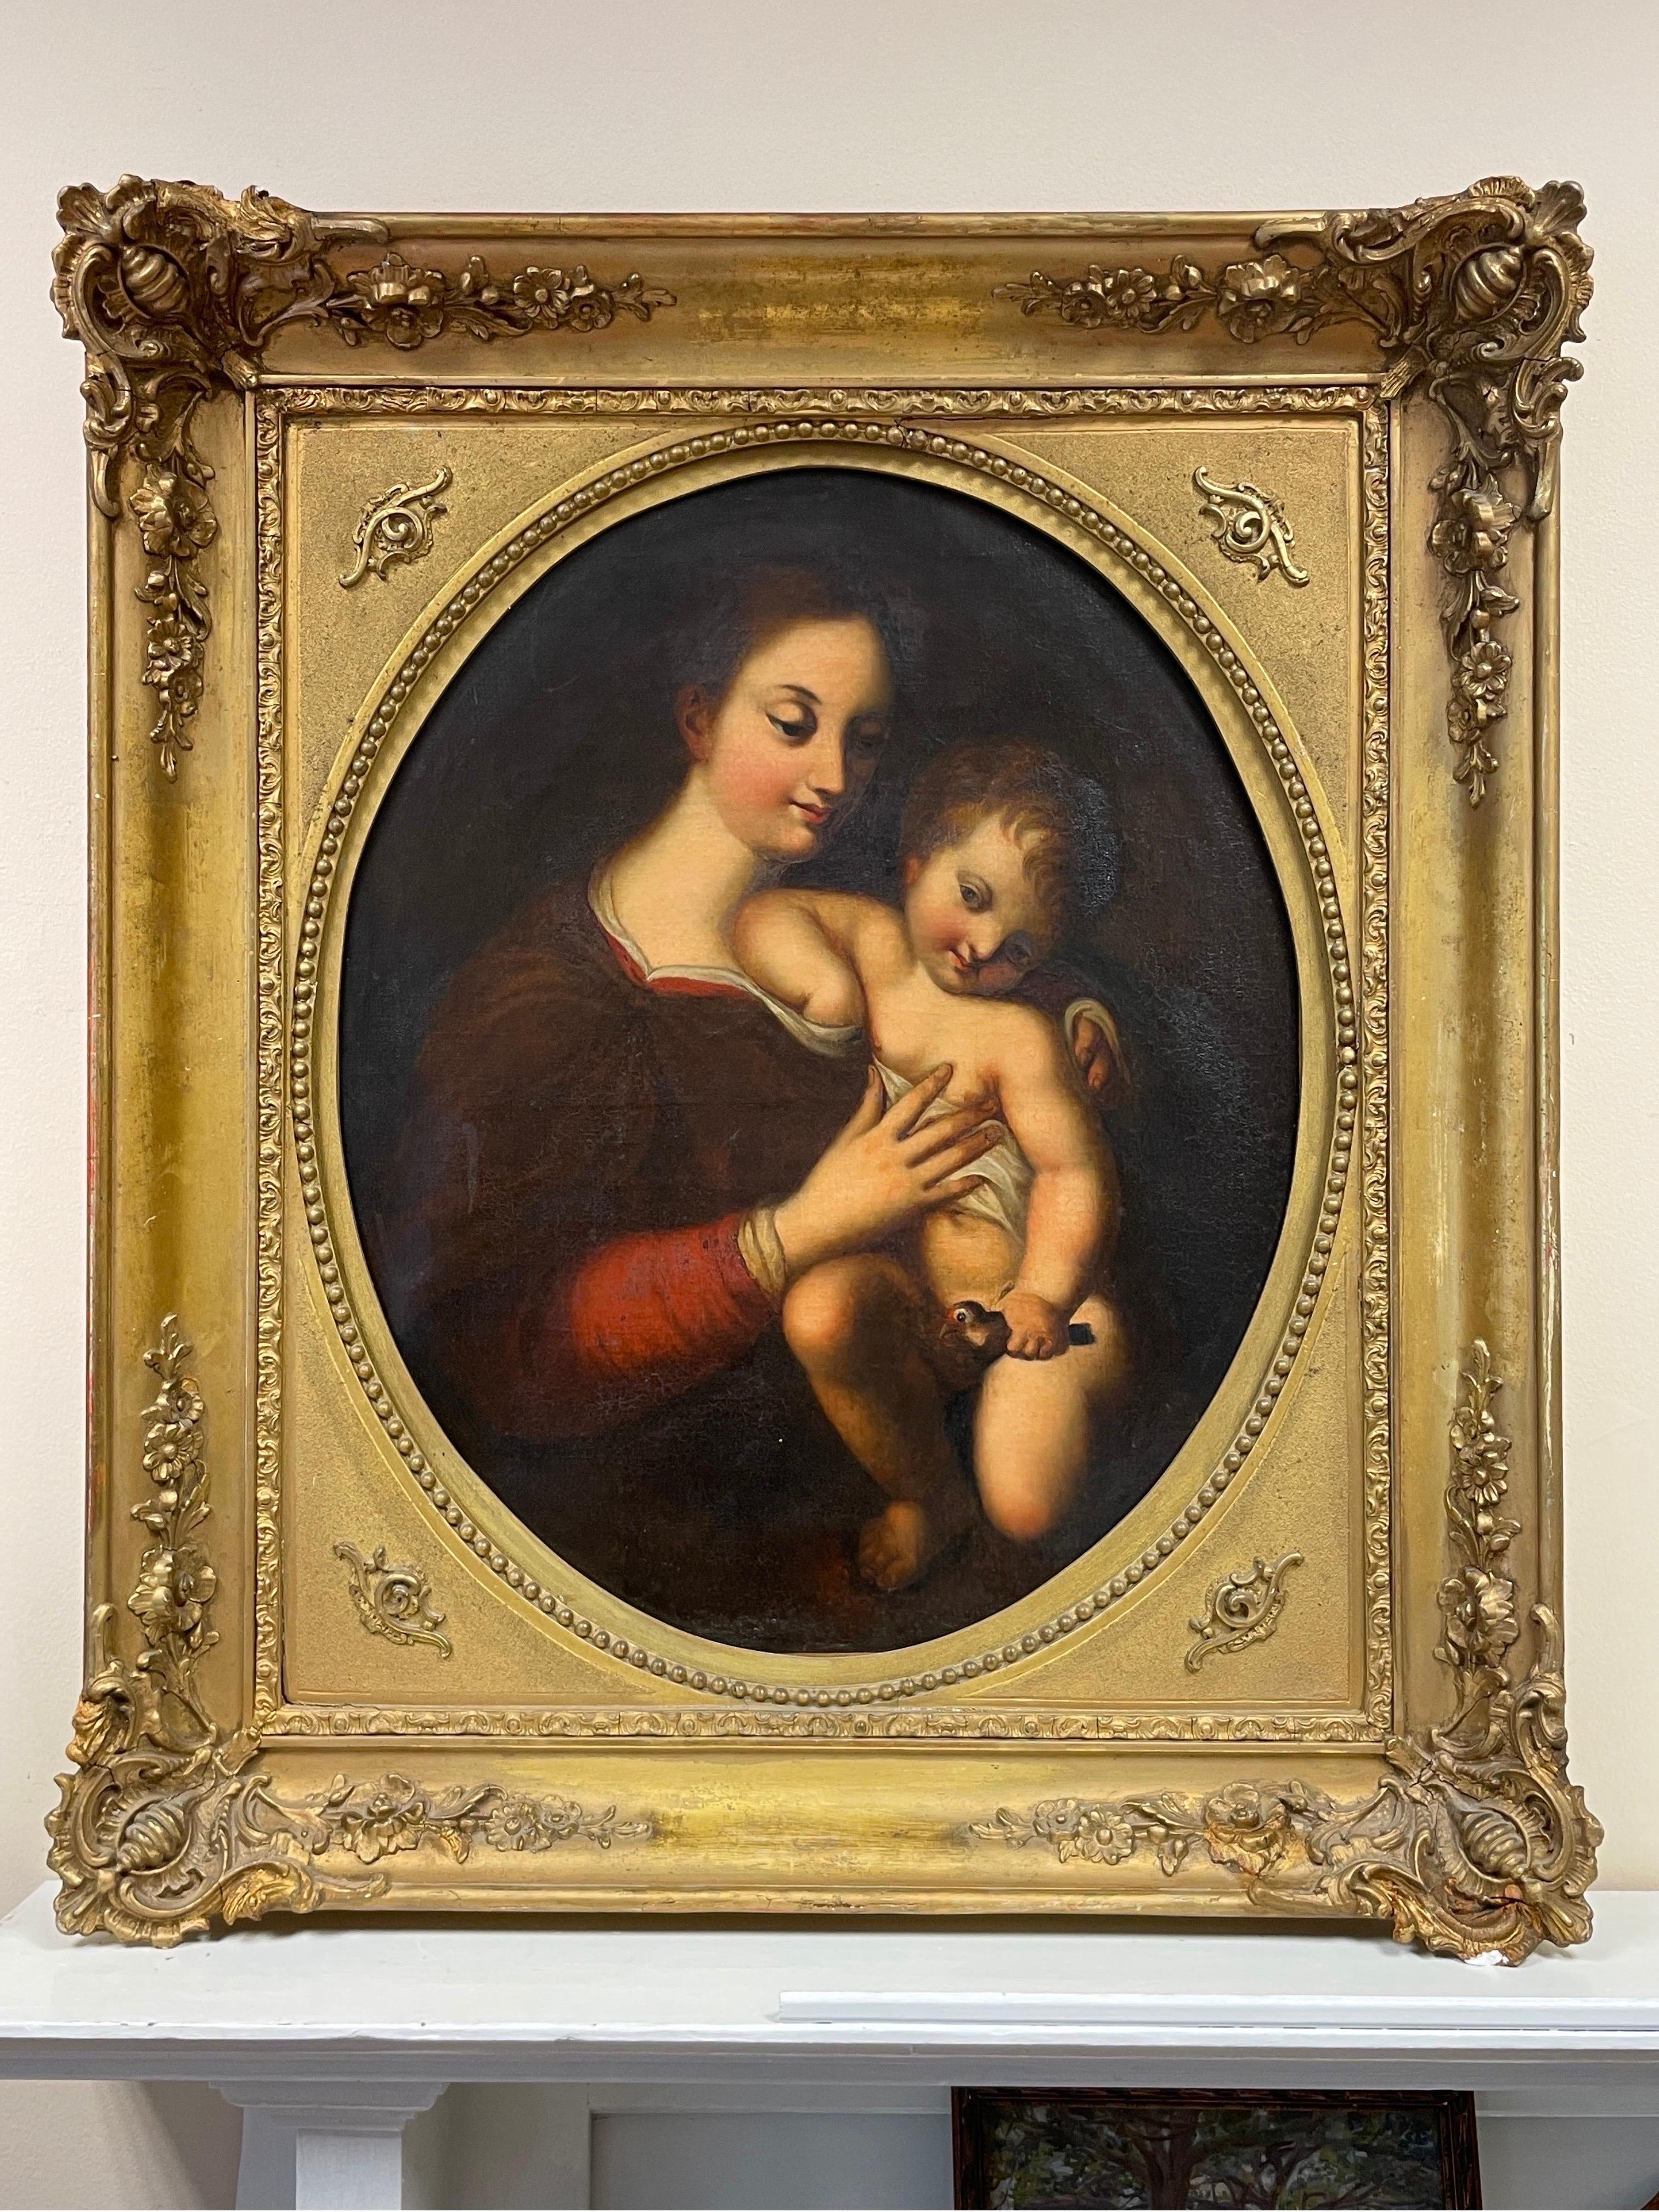 The Madonna & Child, with Goldfinch
18th century Italian School
oil painting on canvas within antique oval gilt frame
overall size: 33 x 28 inches
condition: very good indeed, the frame is included free of charge but we do not make any warranty its